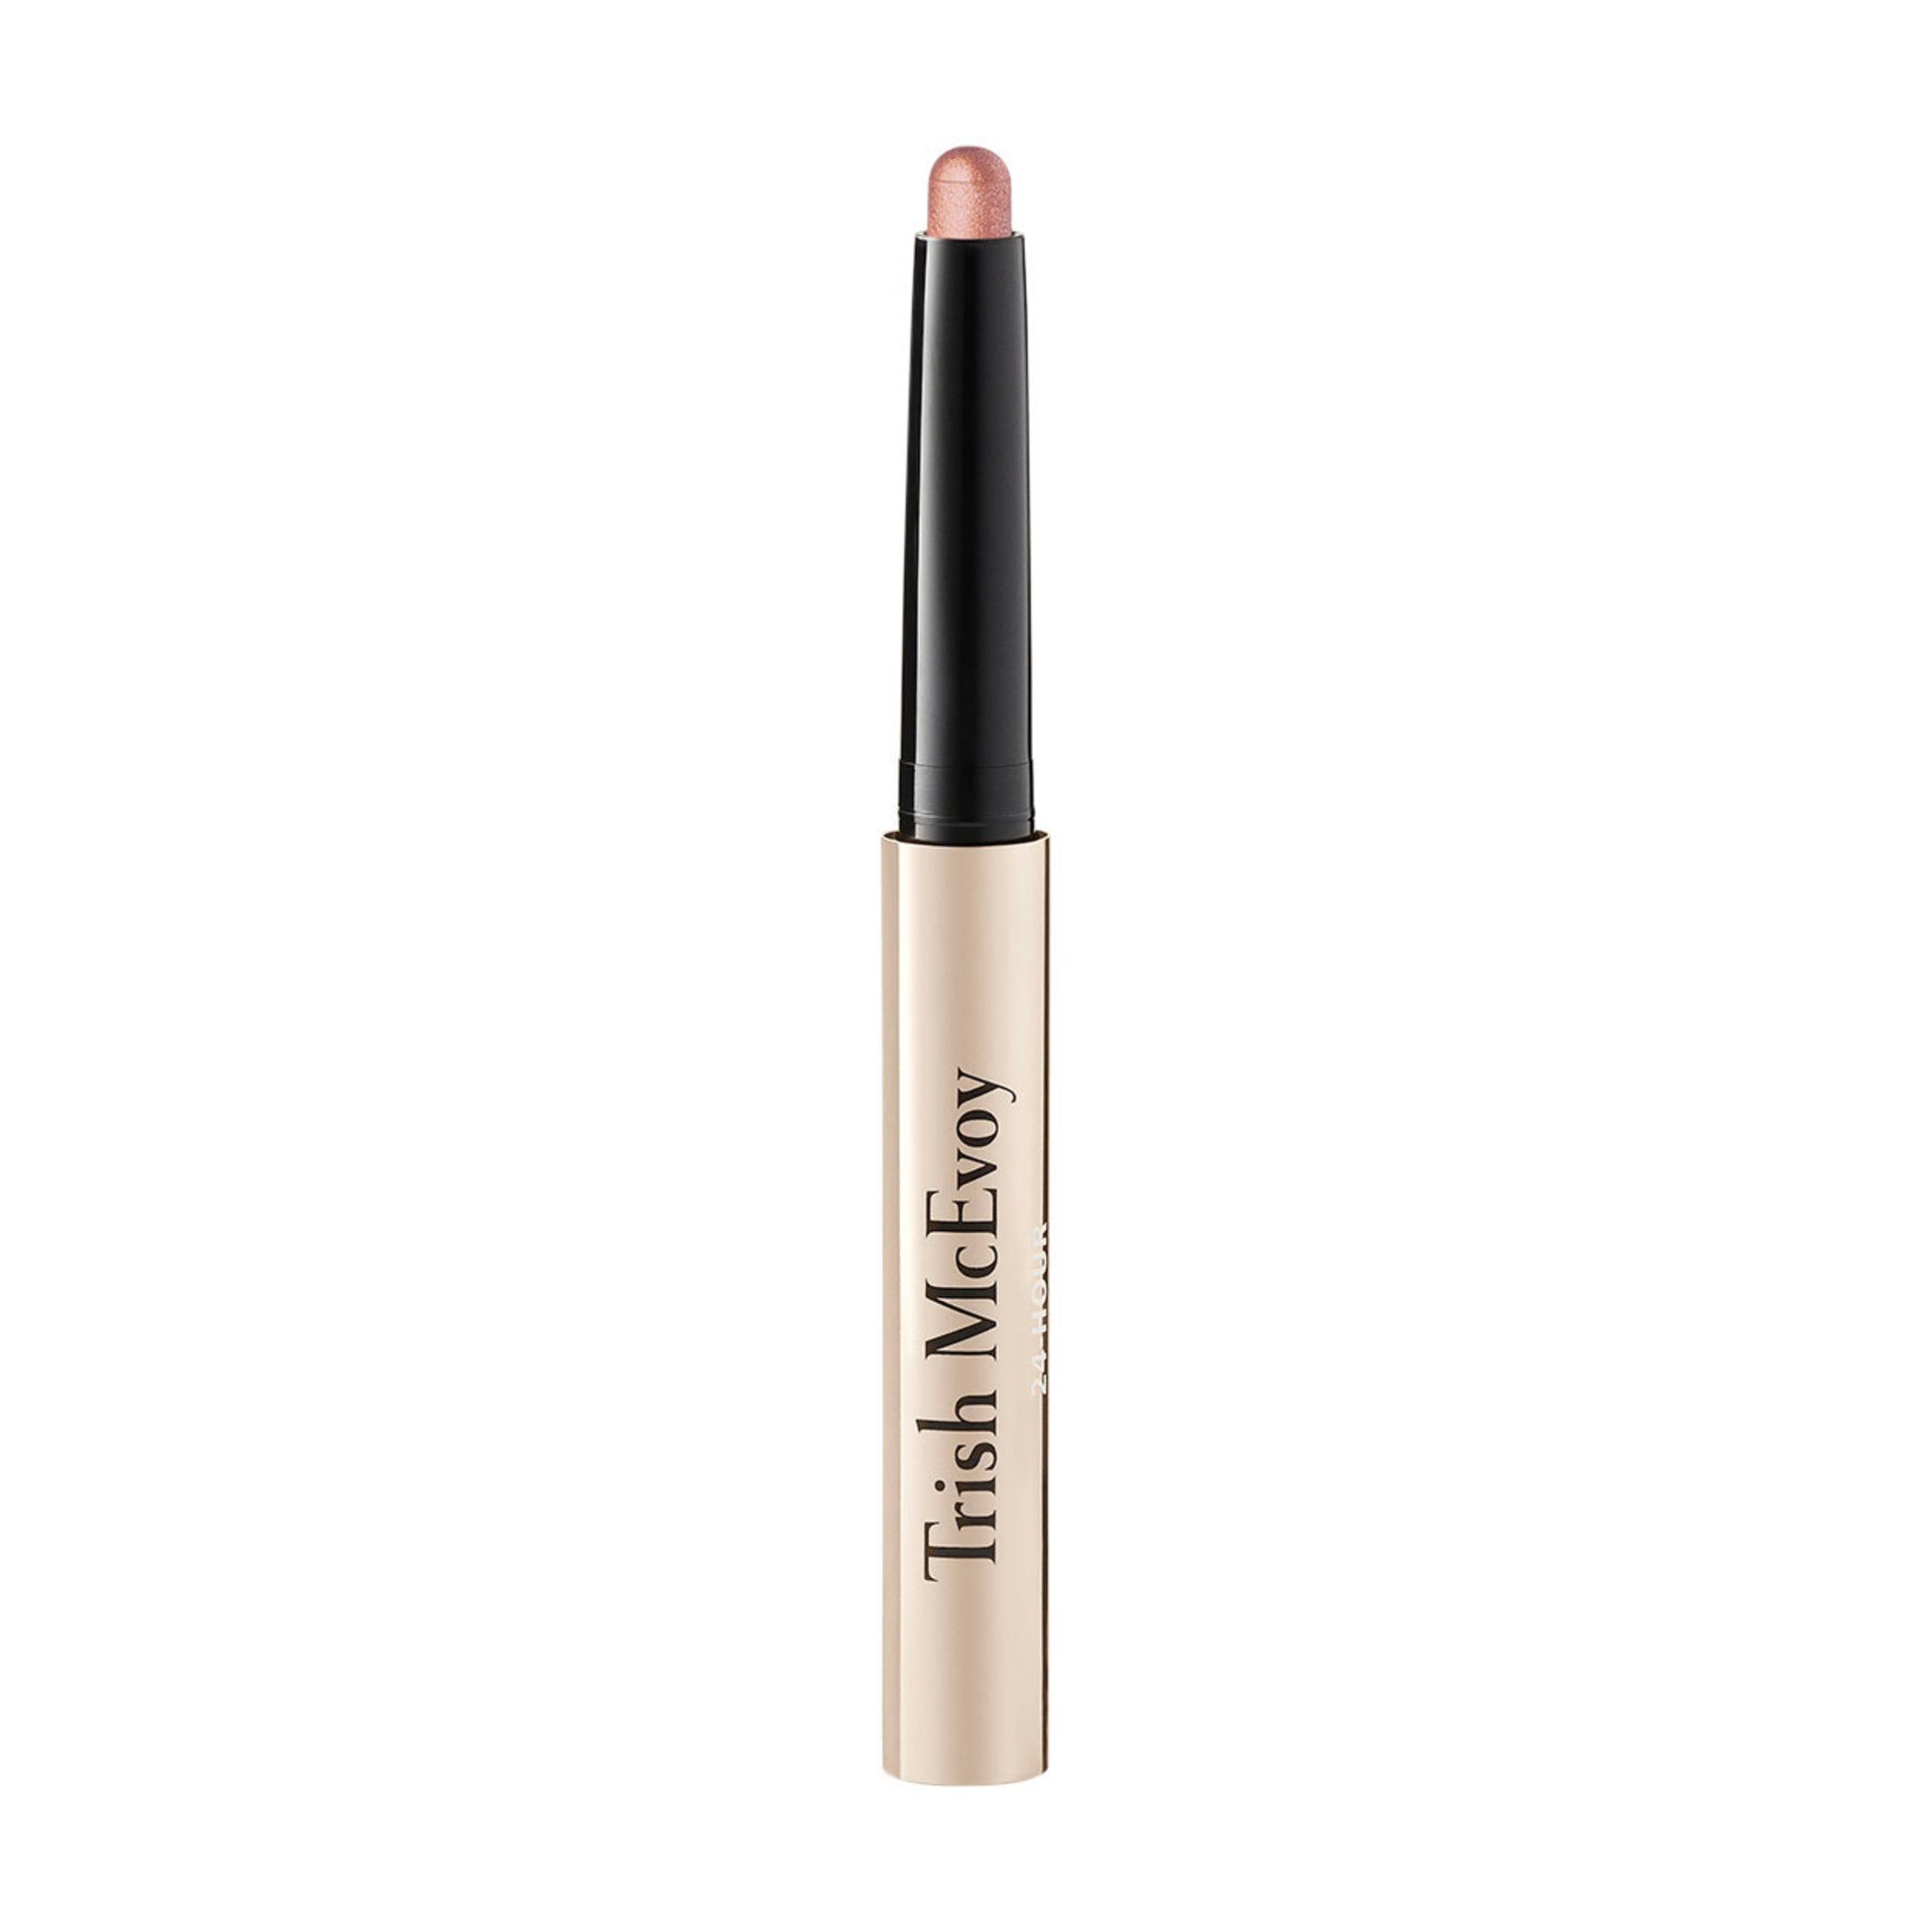 Trish McEvoy 24 Hour Eye Shadow And Liner Color/Shade variant: Rose Quartz main image. This product is in the color nude